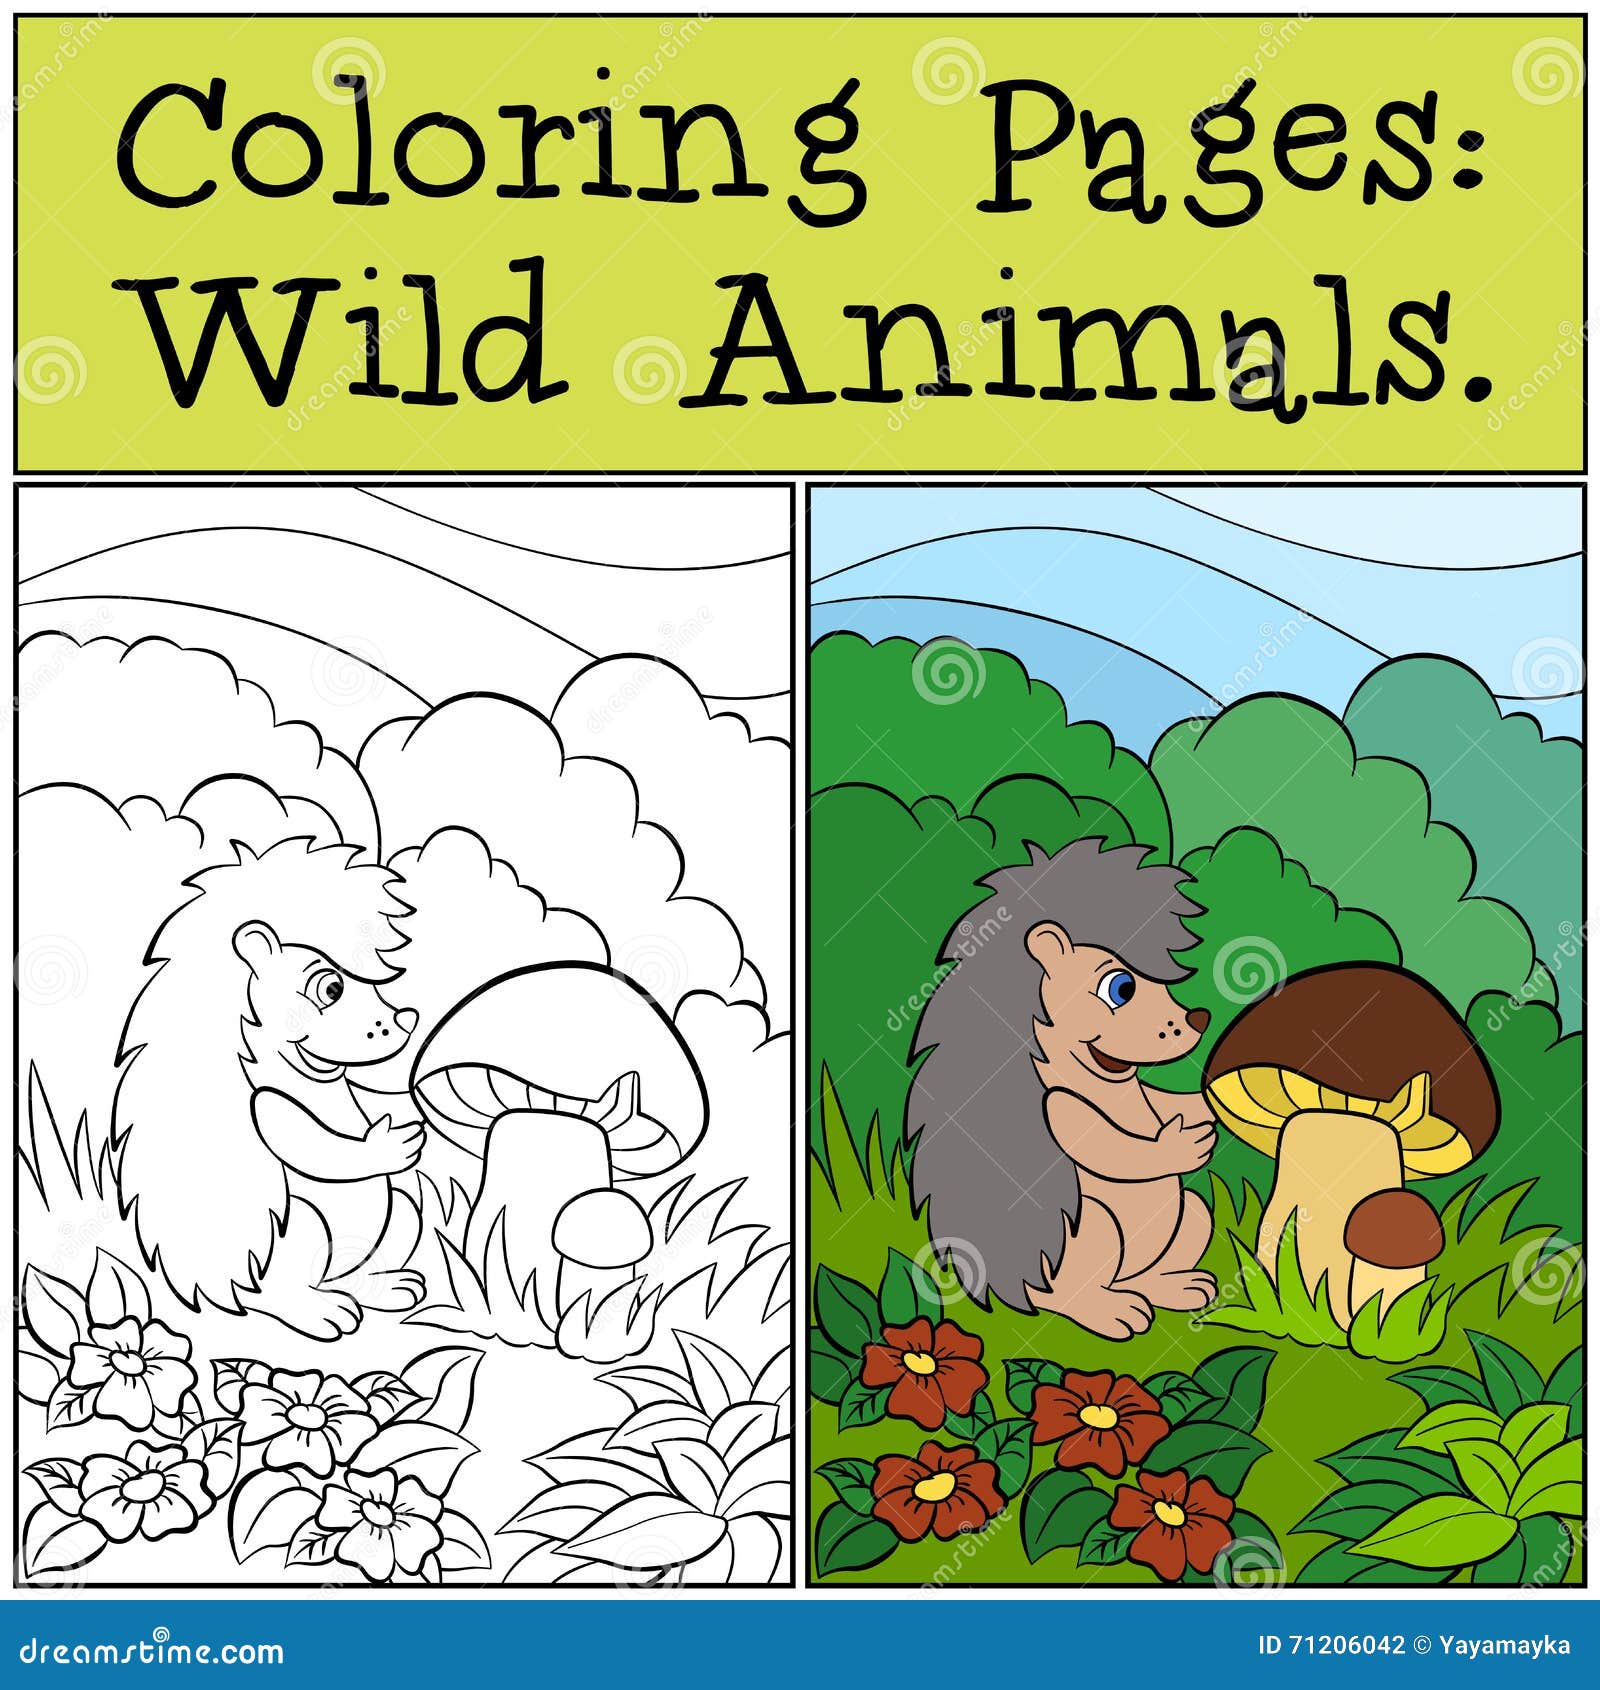 coloring pages: wild animals. little cute hedgehog.